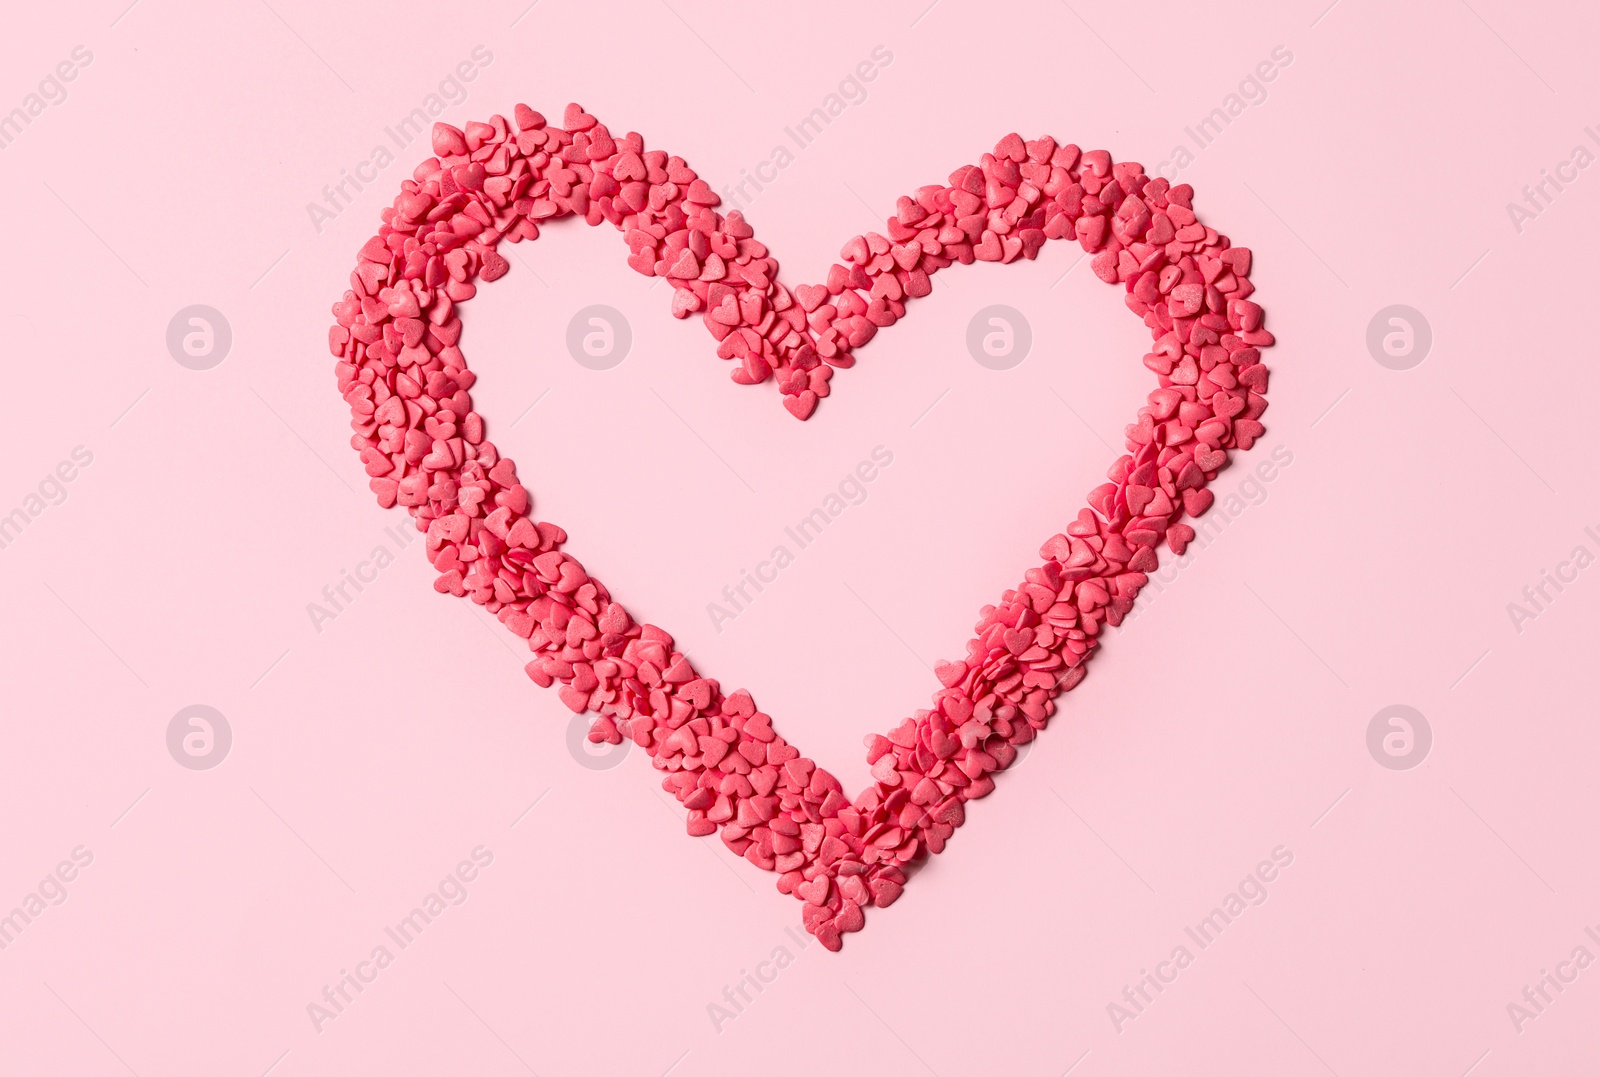 Photo of Heart made with sprinkles on pink background, top view